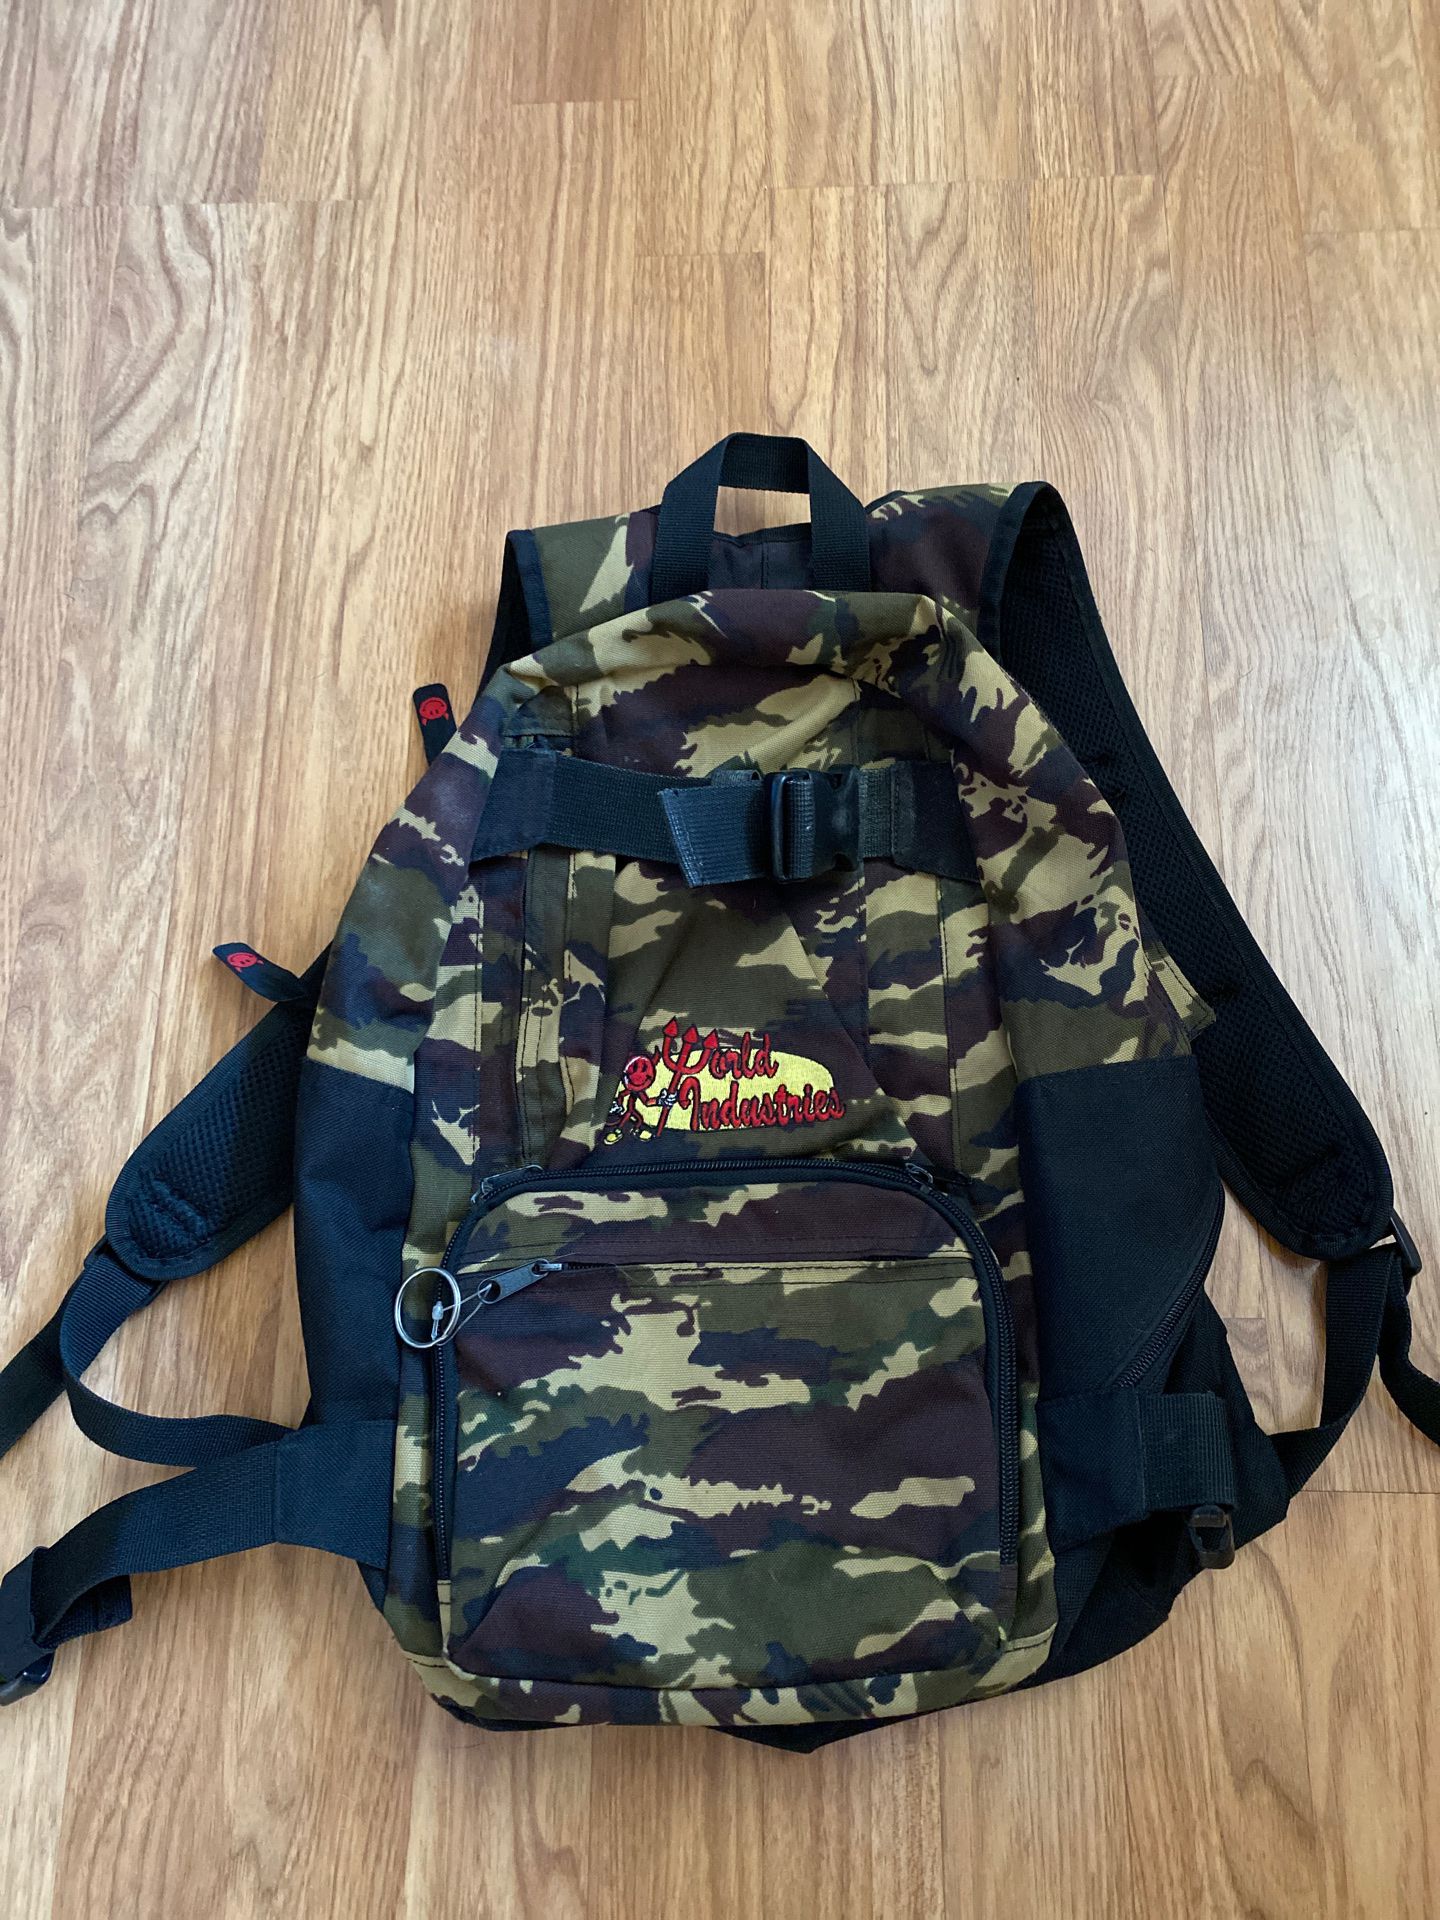 WORLD INDUSTRIES backpack old school 1980’s FIRM $23 no less